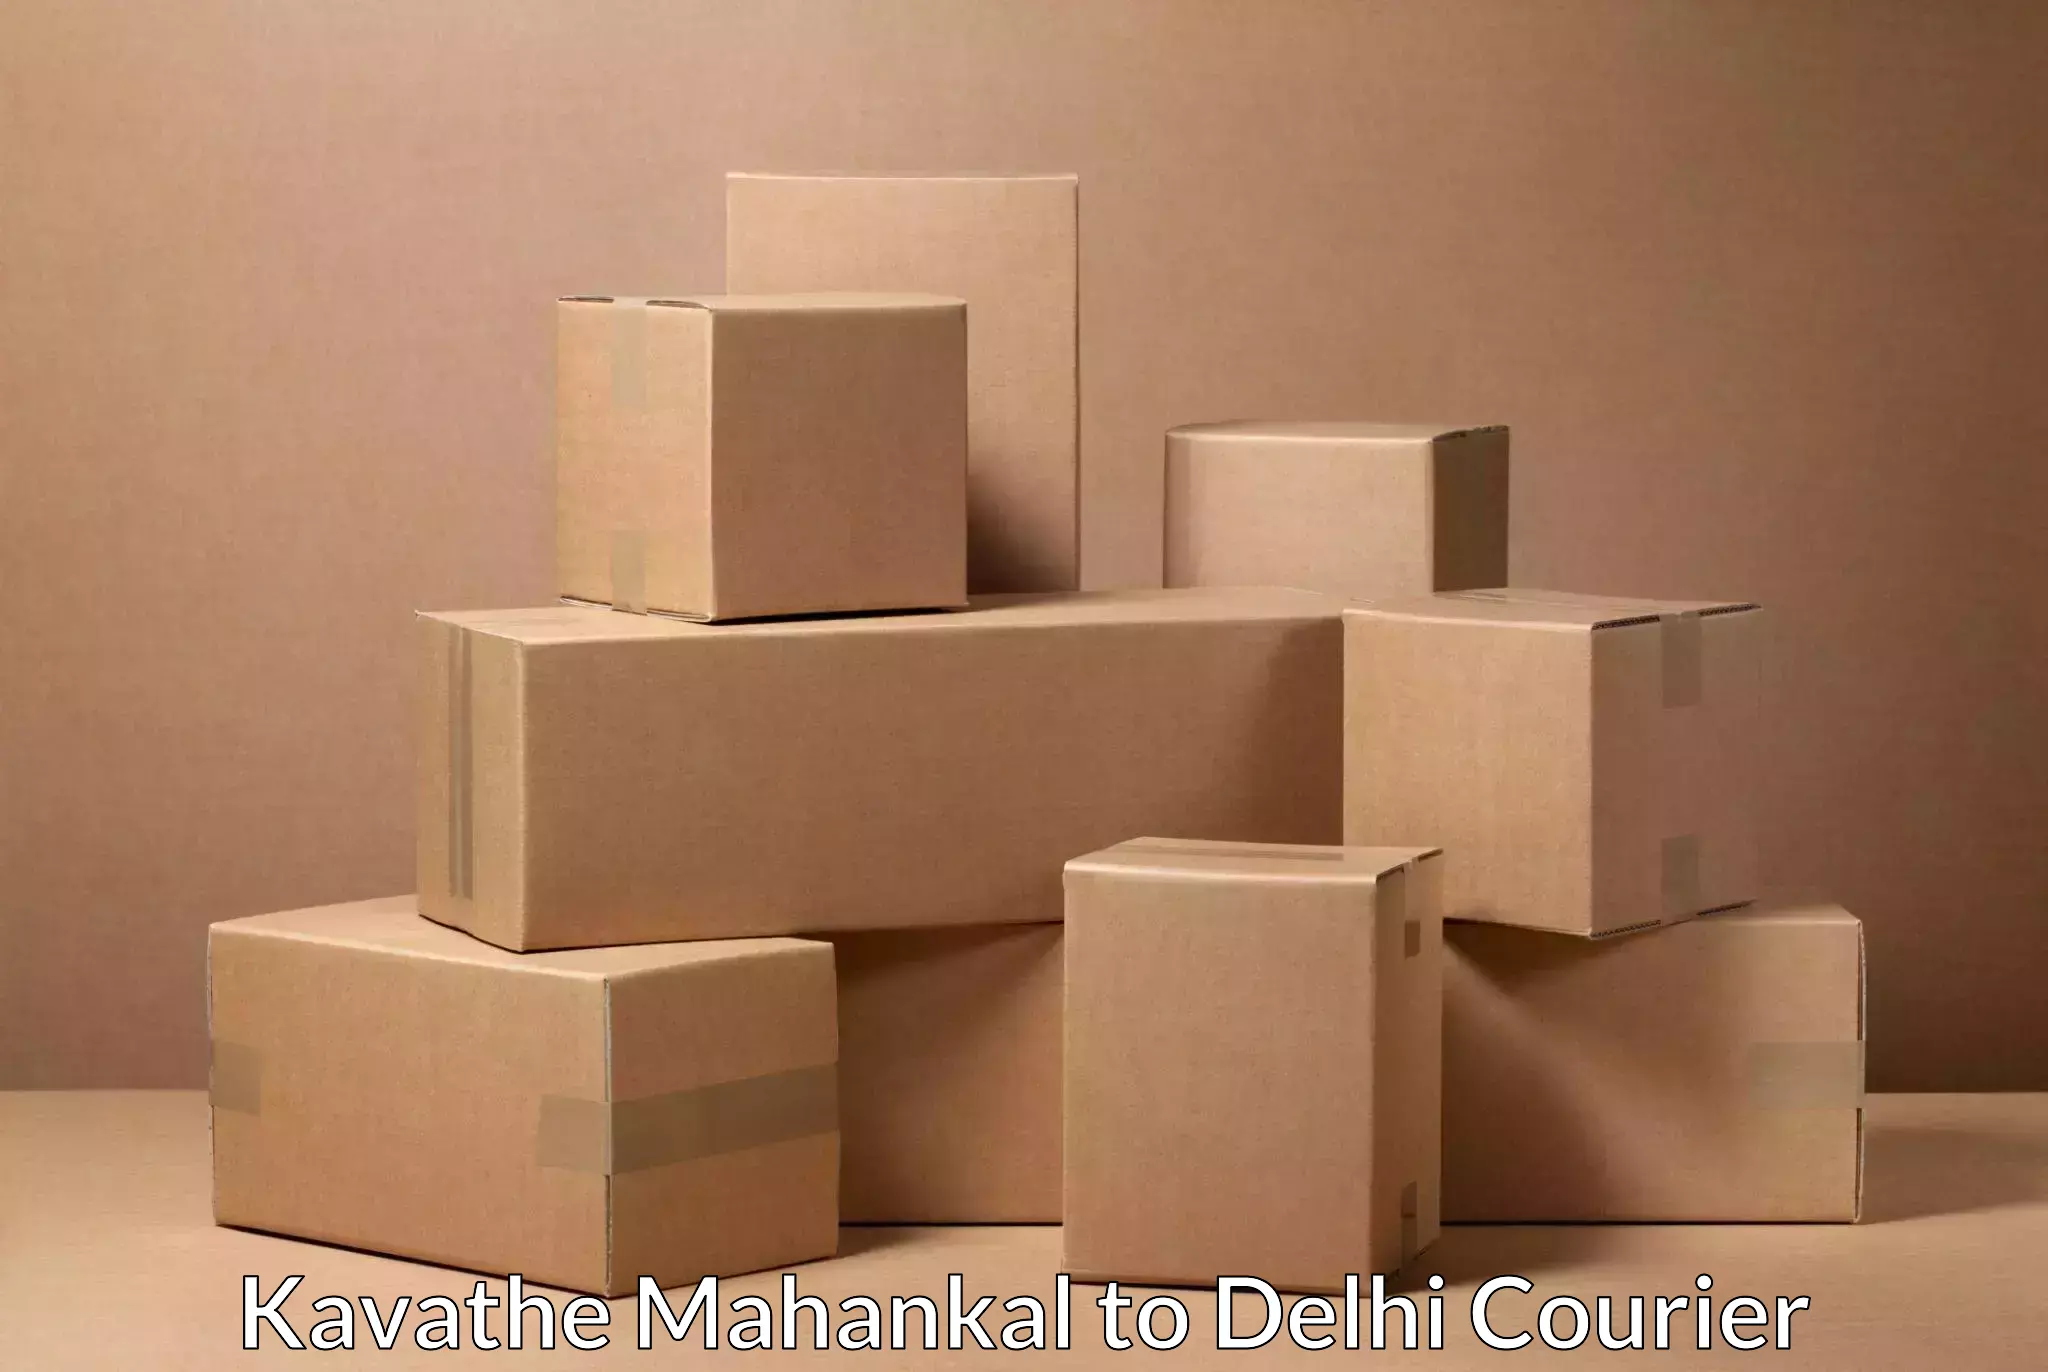 End-to-end delivery Kavathe Mahankal to Delhi